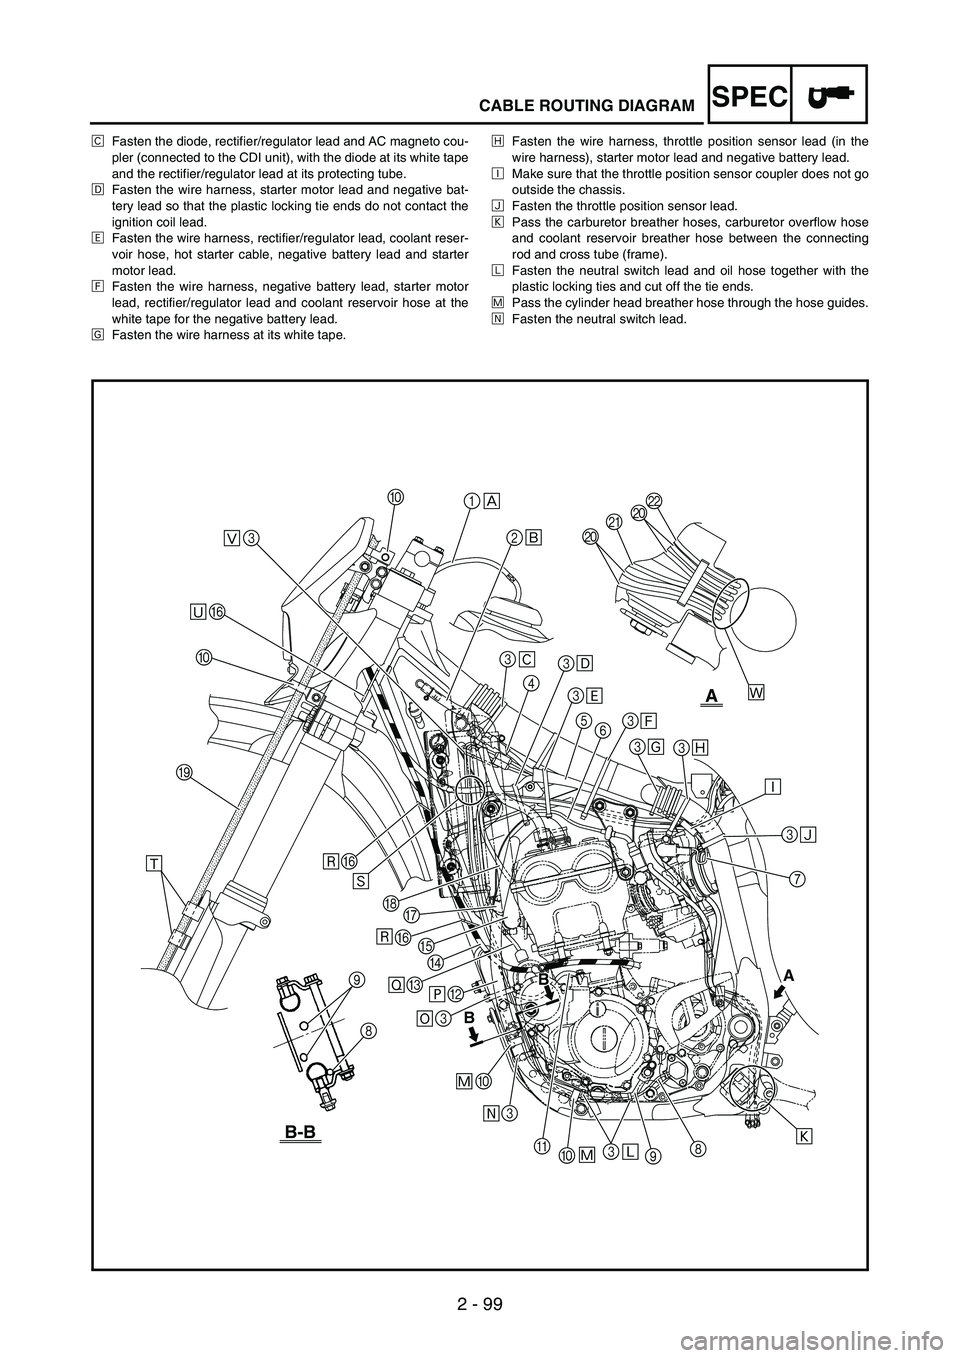 YAMAHA WR 250F 2004  Manuale de Empleo (in Spanish) SPEC
2 - 99
CABLE ROUTING DIAGRAM
ÊFasten the diode, rectifier/regulator lead and AC magneto cou-
pler (connected to the CDI unit), with the diode at its white tape
and the rectifier/regulator lead a